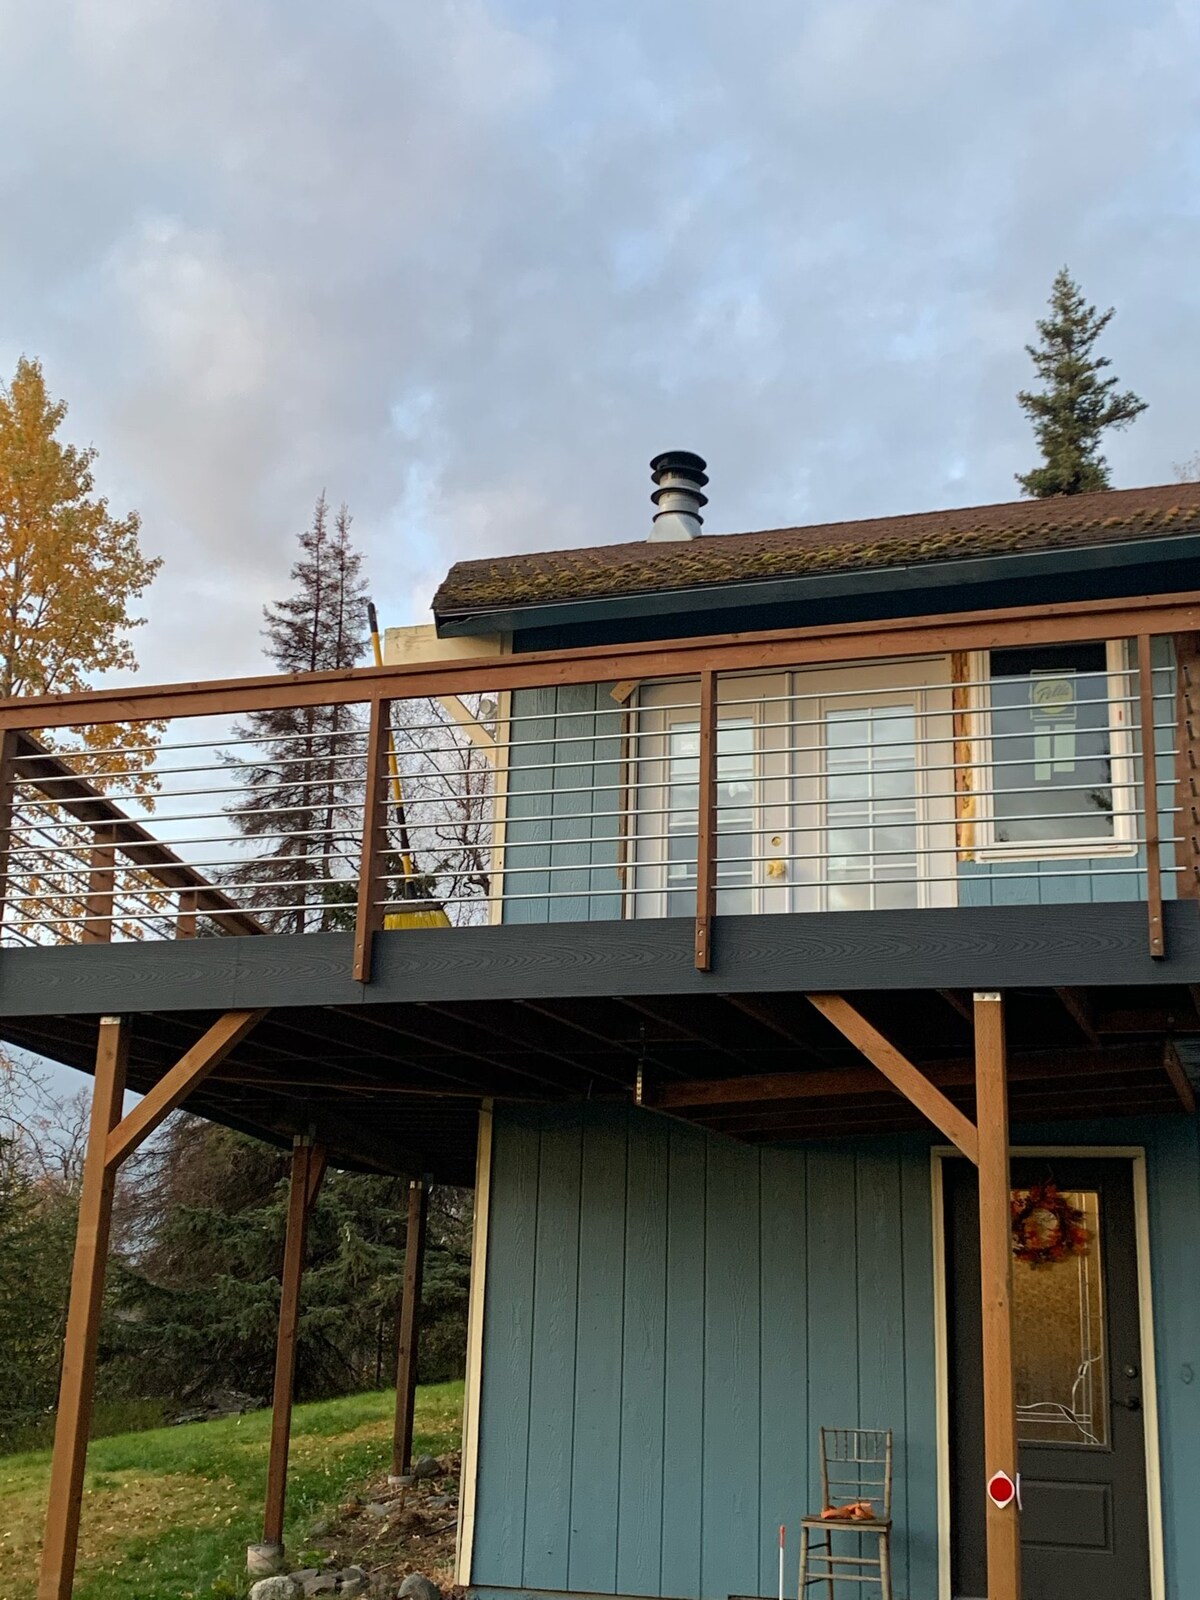 Chugach Chalet with Mt. Susitna View